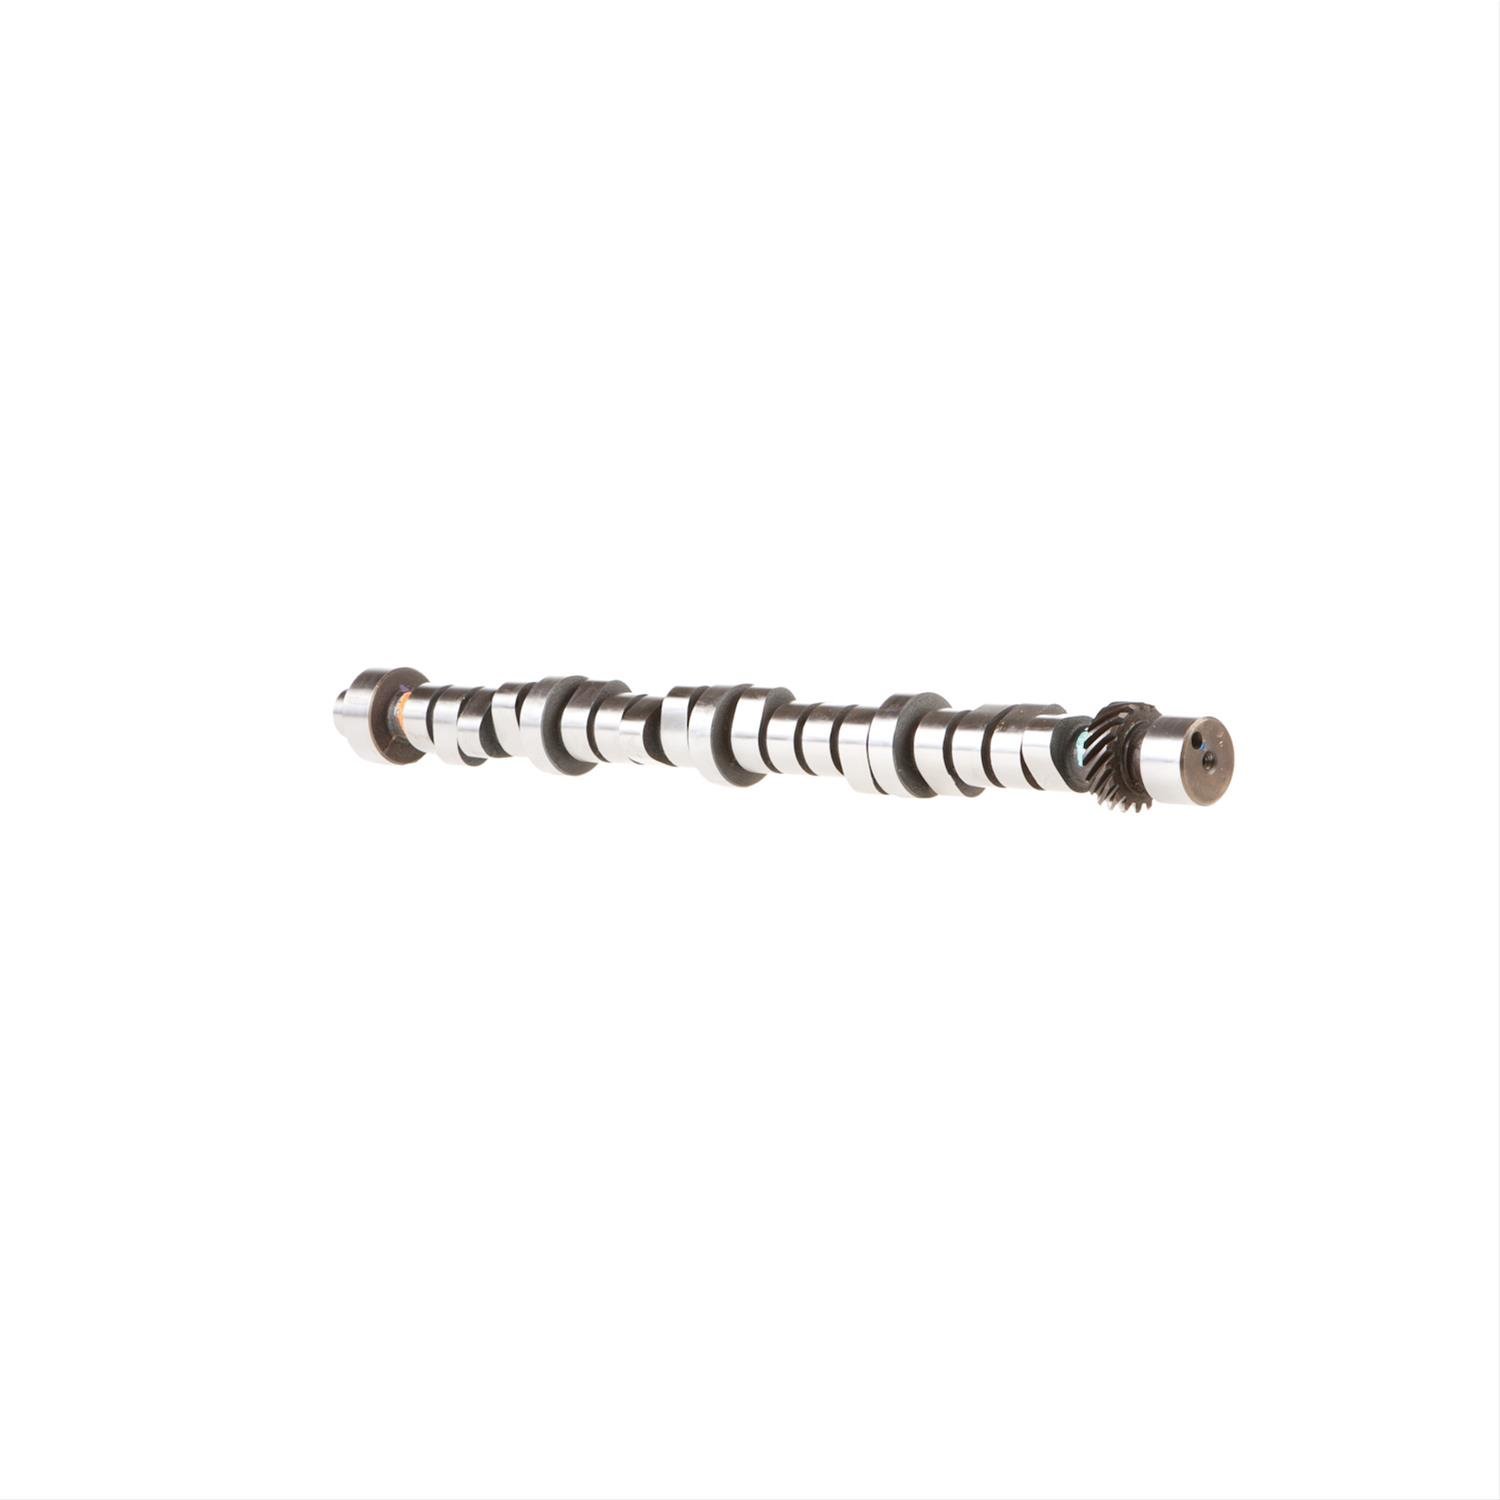 OEM Replacement Camshaft for Select 1992-1997 Dodge/Jeep Models